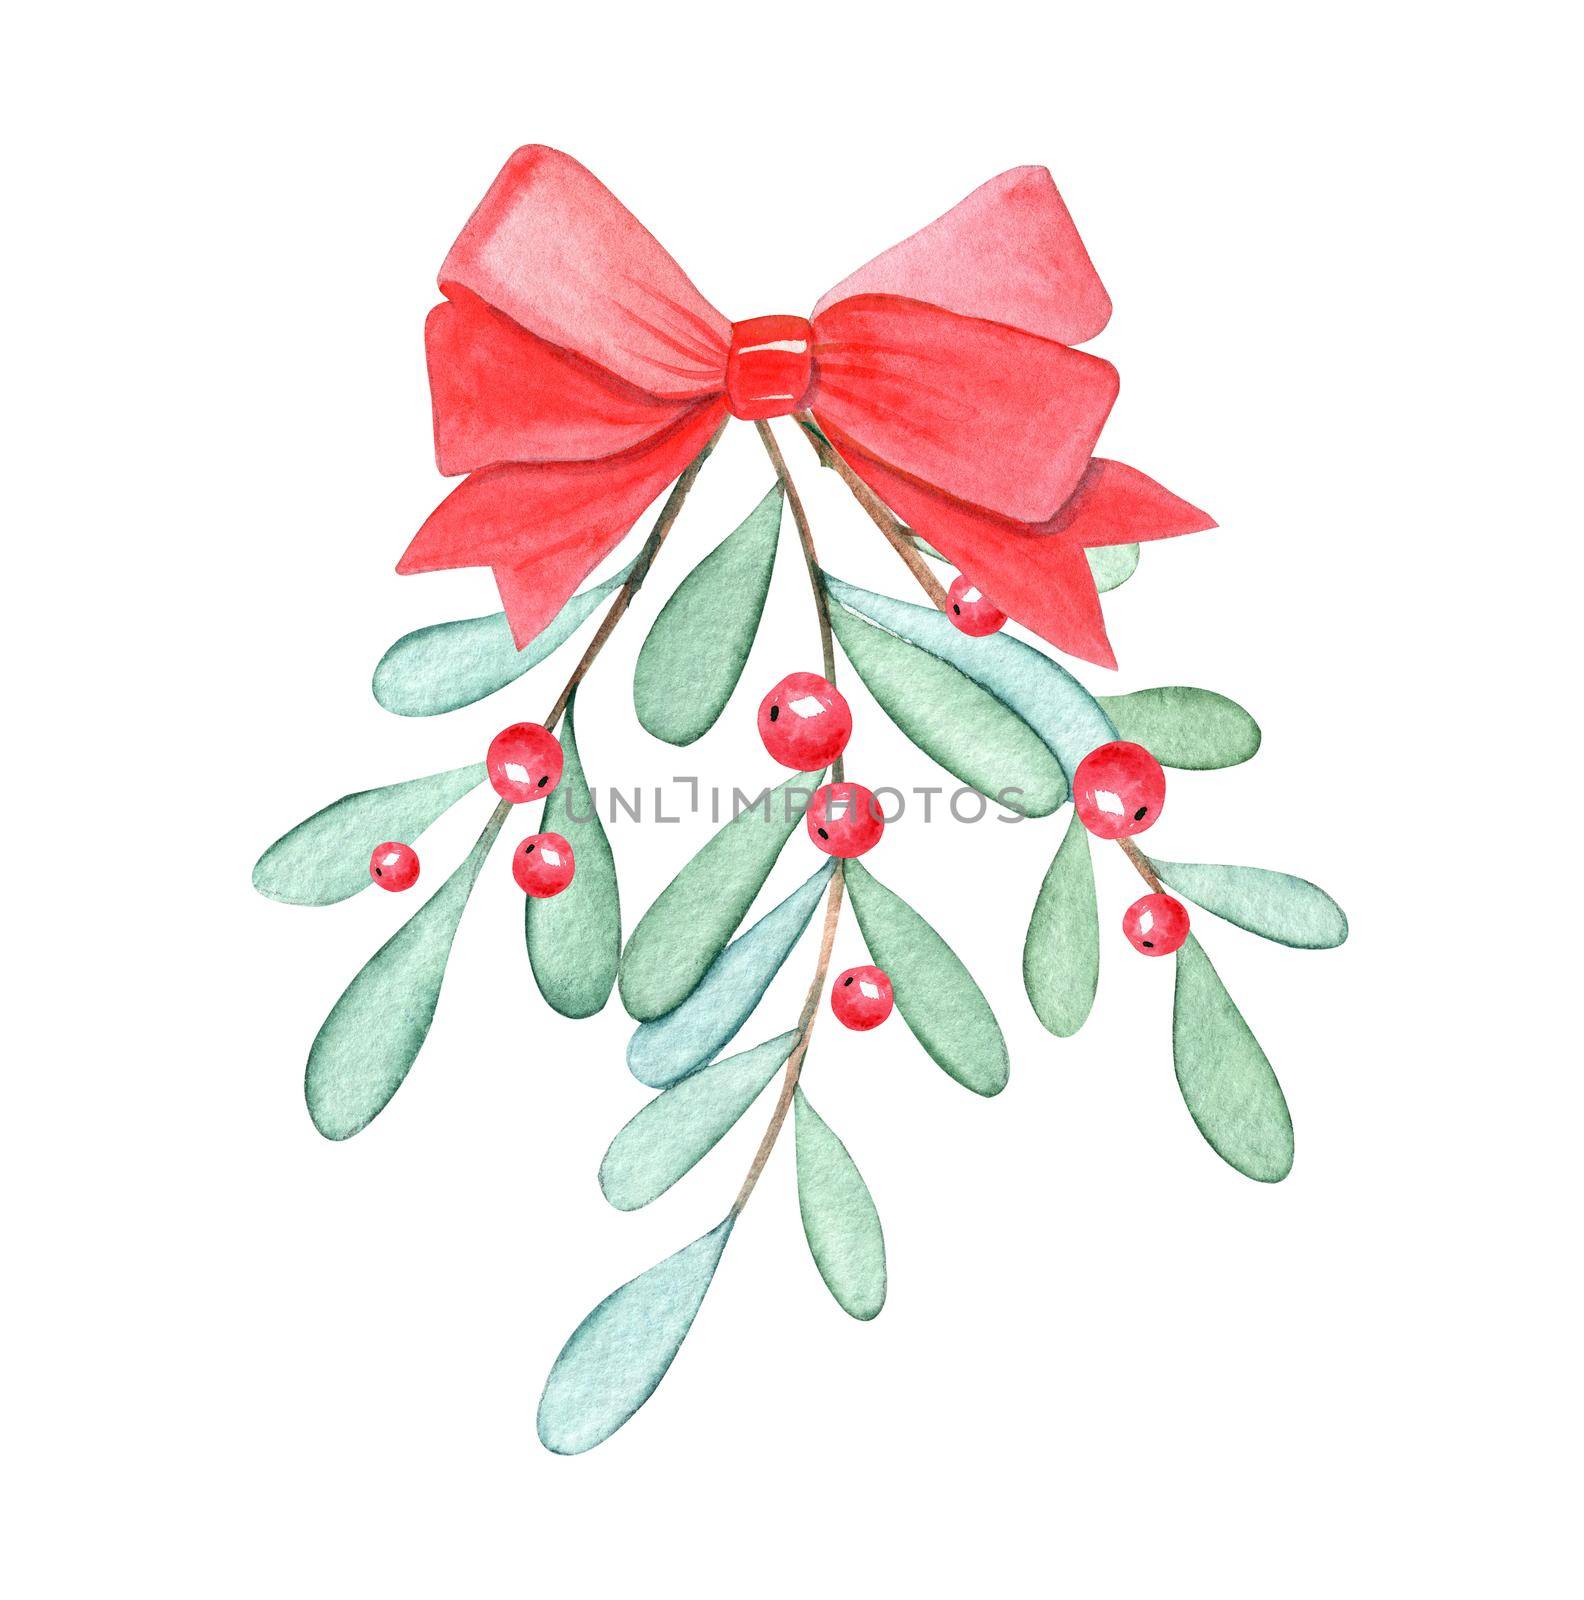 watercolor mistletoe branch with red ribbon isolated on white by dreamloud